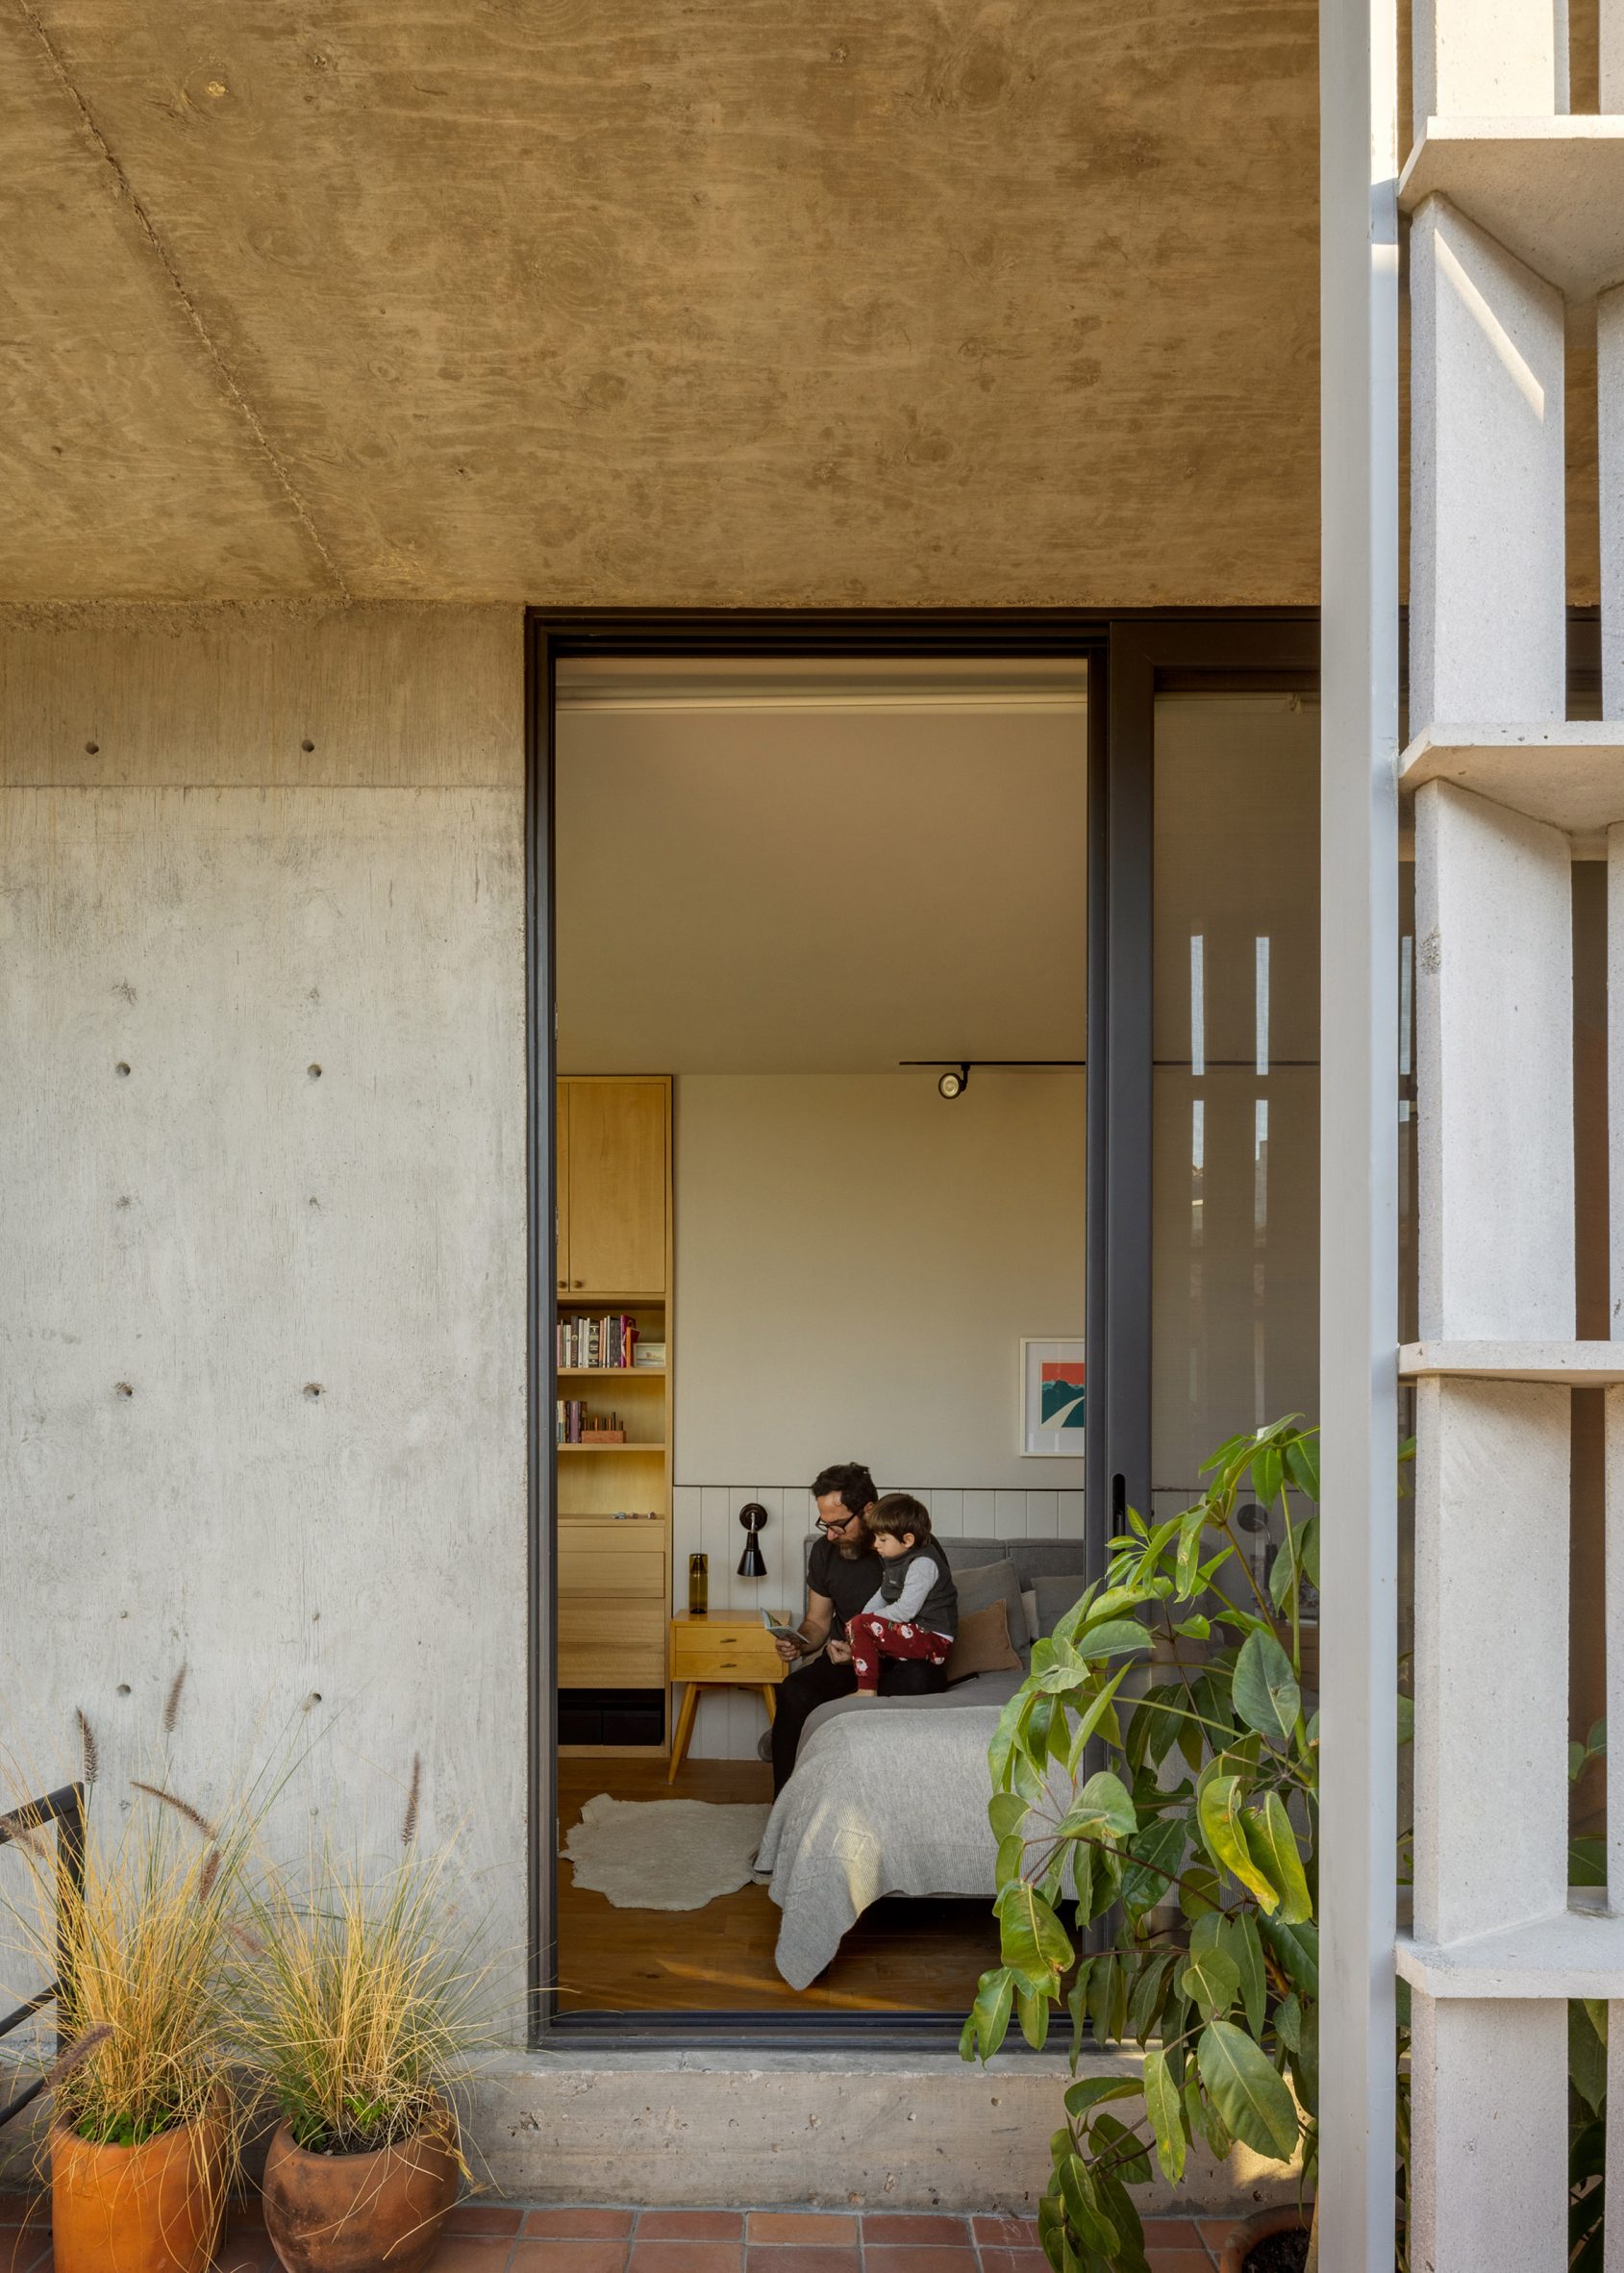 Concrete walled-house in Mexico